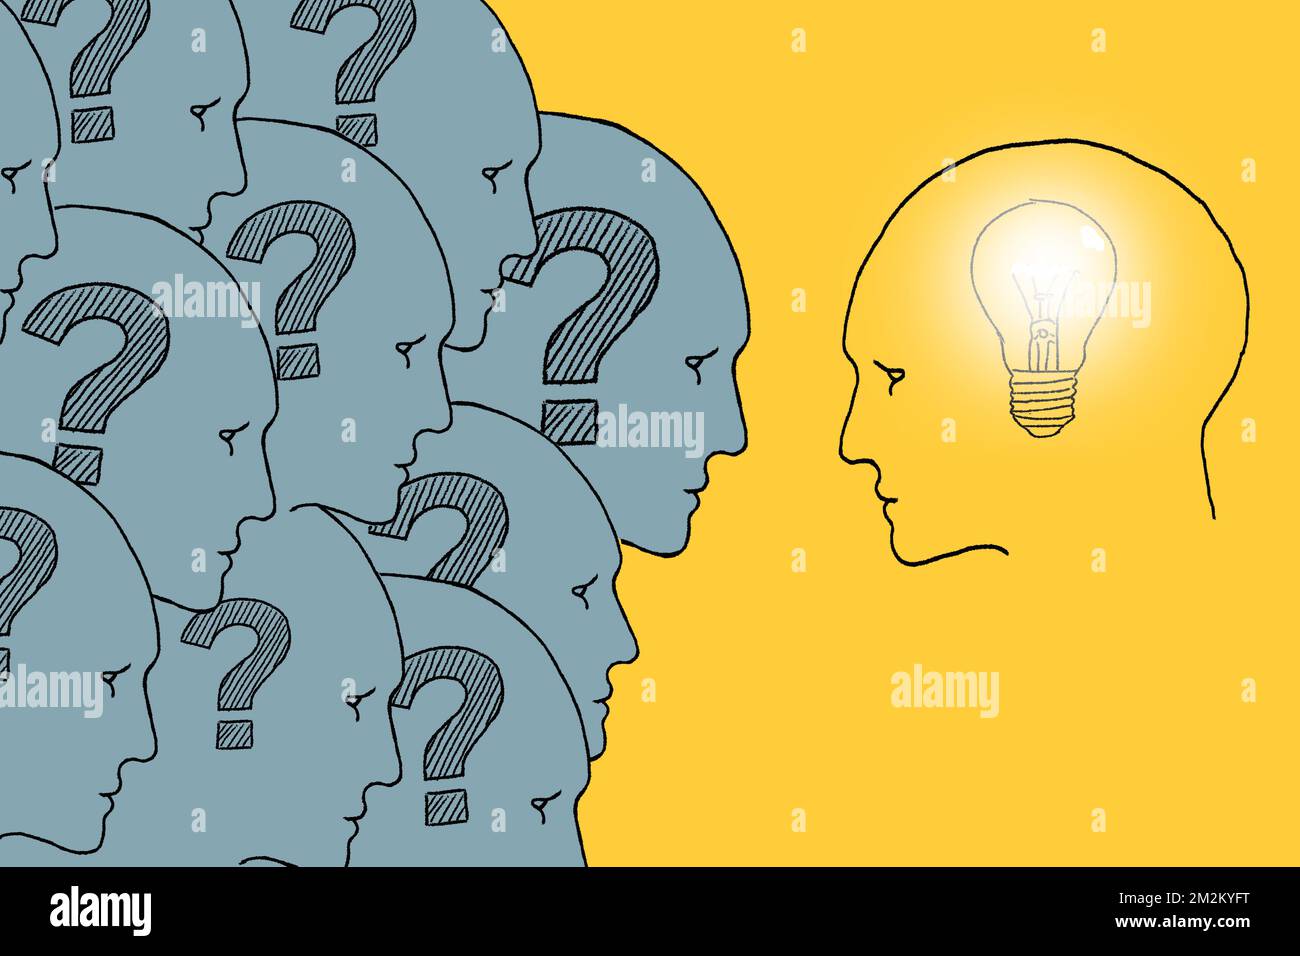 Human heads with question marks inside and one head with light bulb inside. Illustration on yellow. Idea generation, FAQ Stock Photo